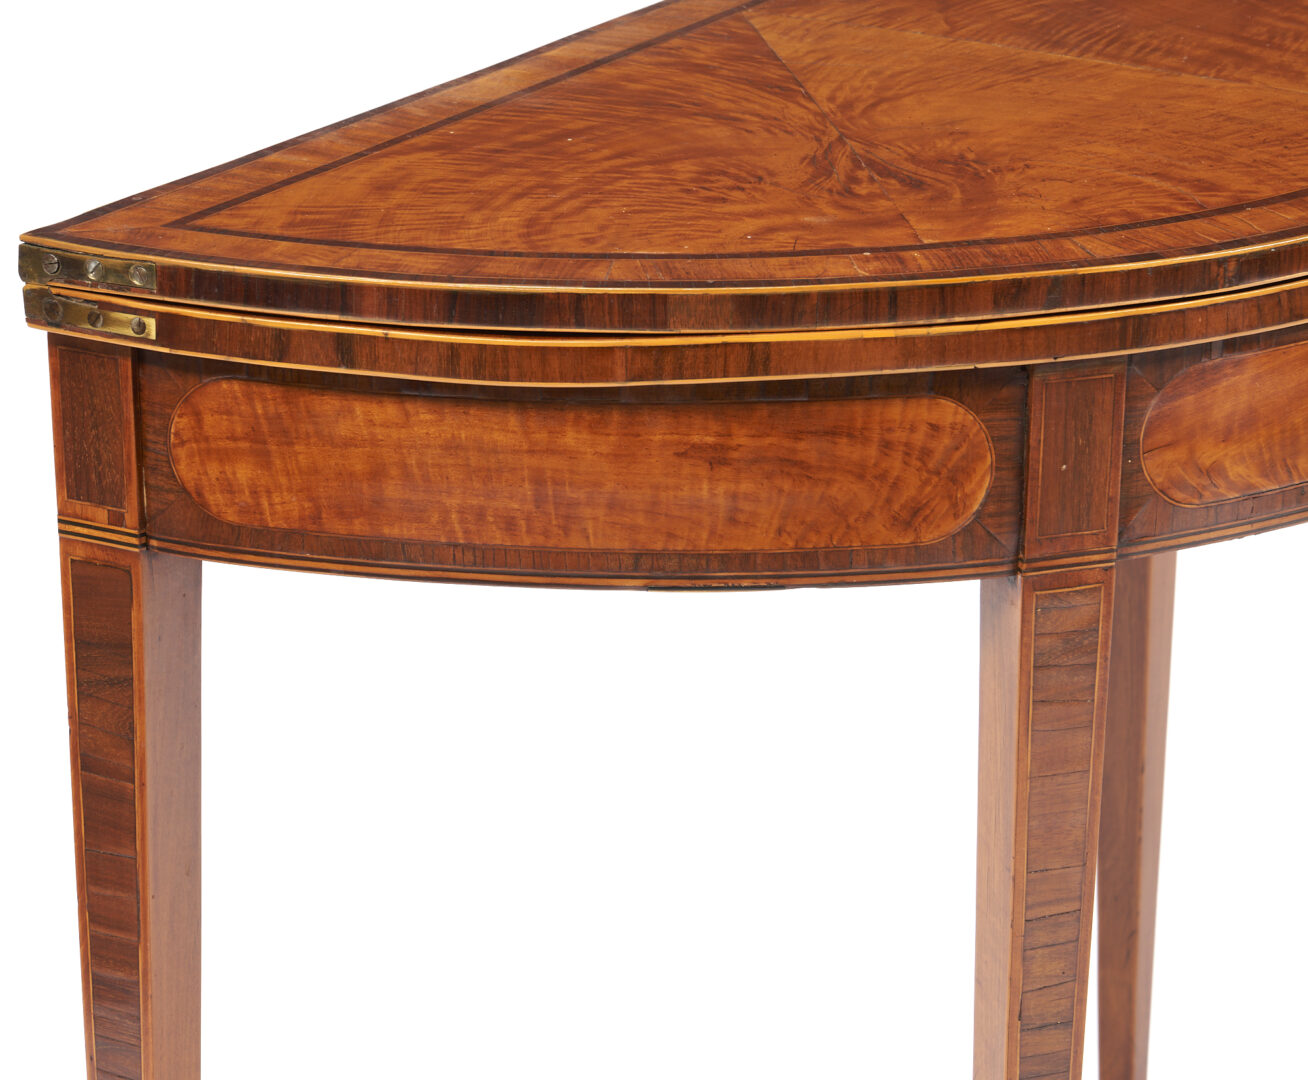 Lot 200: Inlaid and Veneered Demilune Game Table, circa 1800